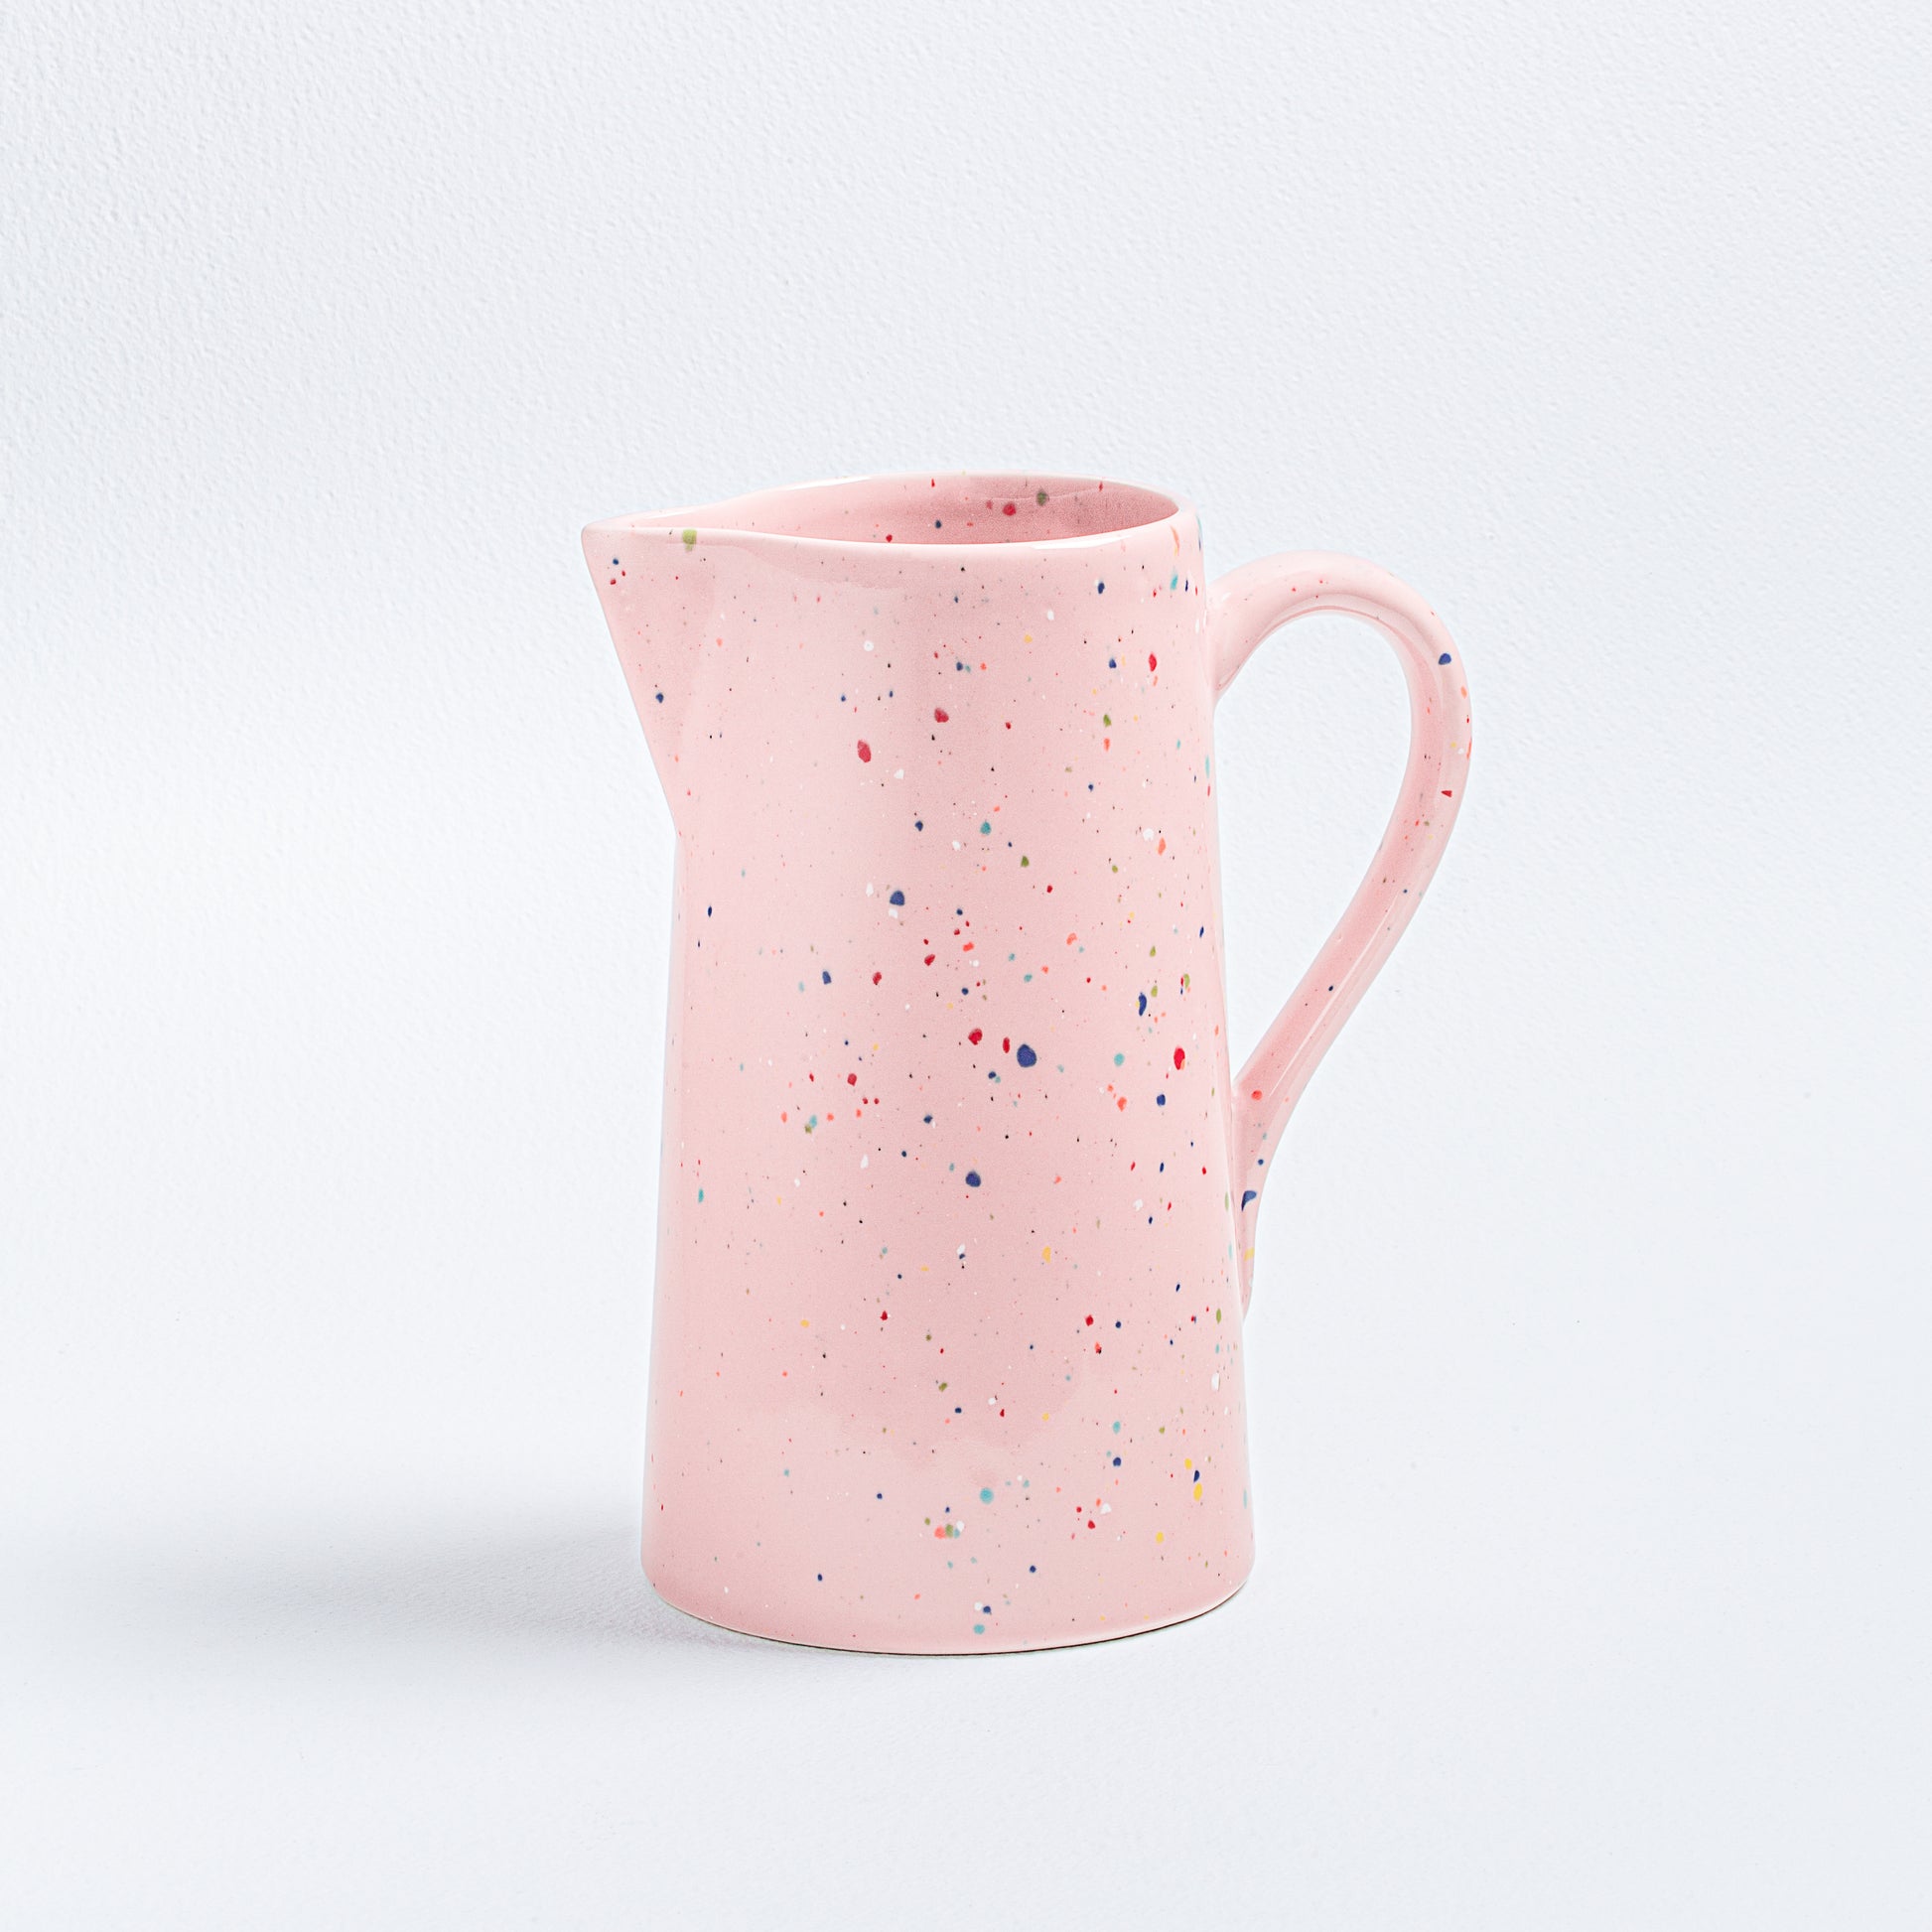 New Party Pitcher | Pink Pitcher 1.7L | Egg Back Home